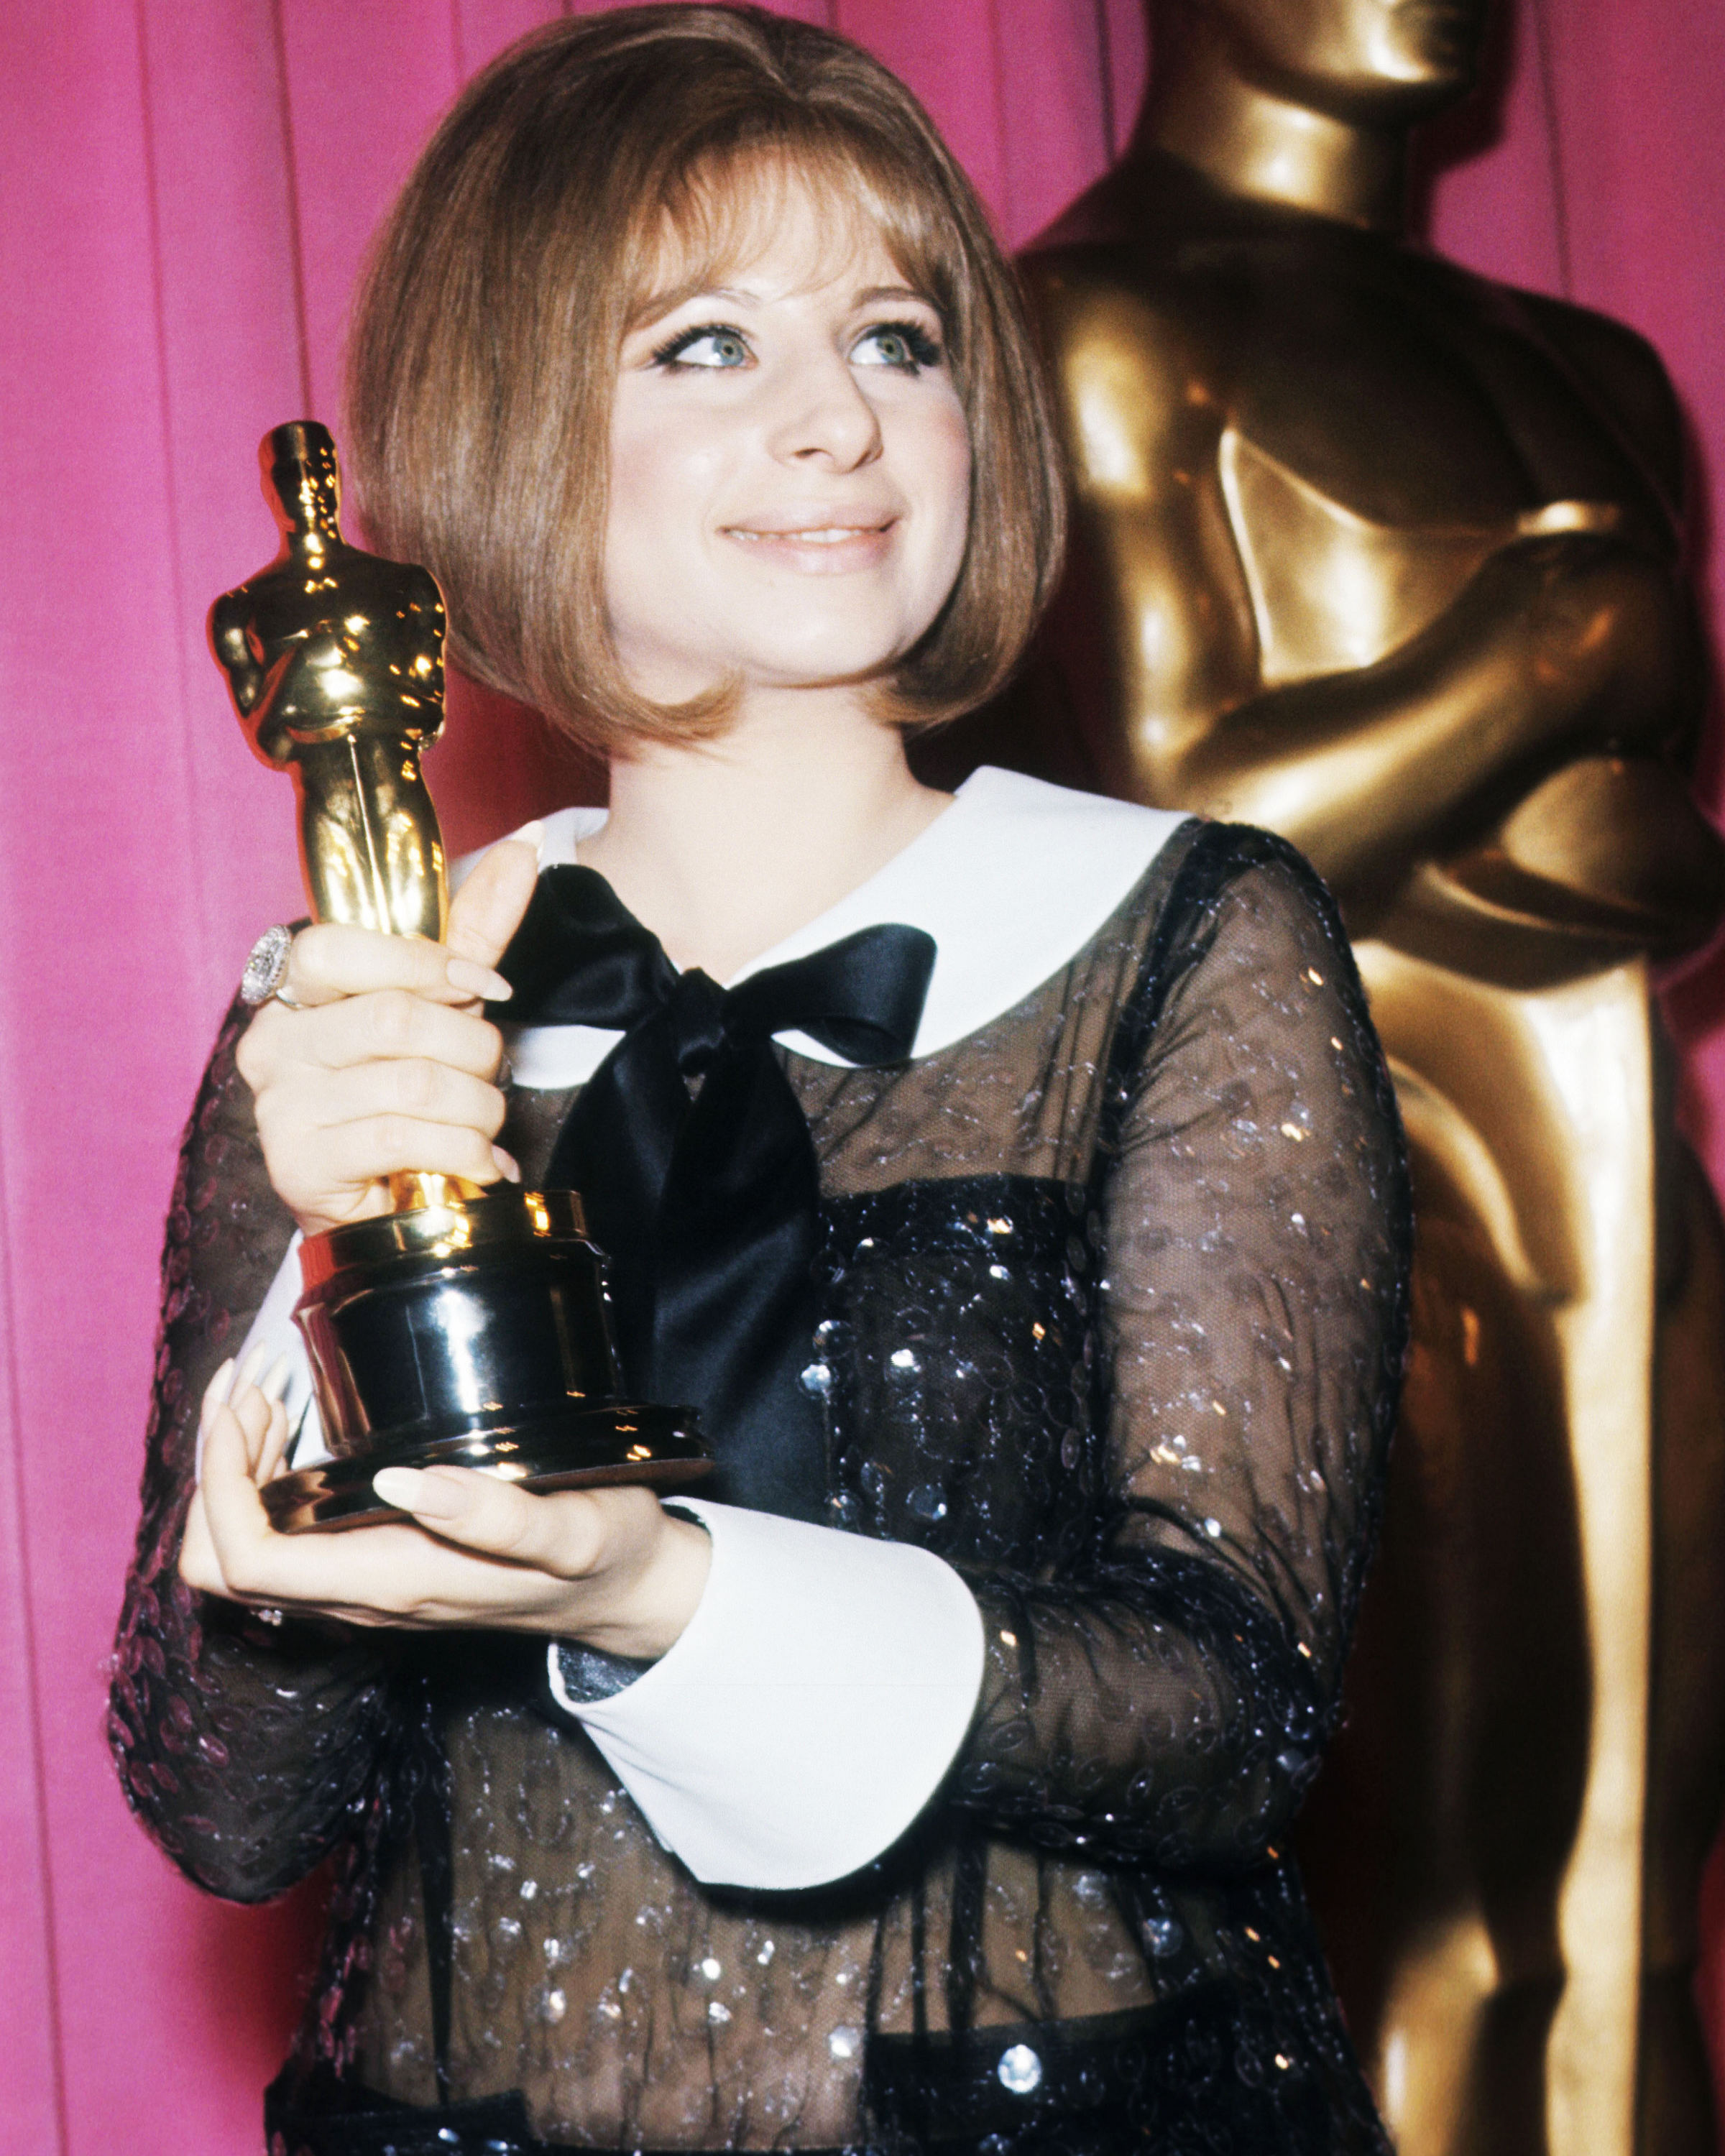 Barbra Streisand at the Oscars on April 14, 1969 | Source: Getty Images